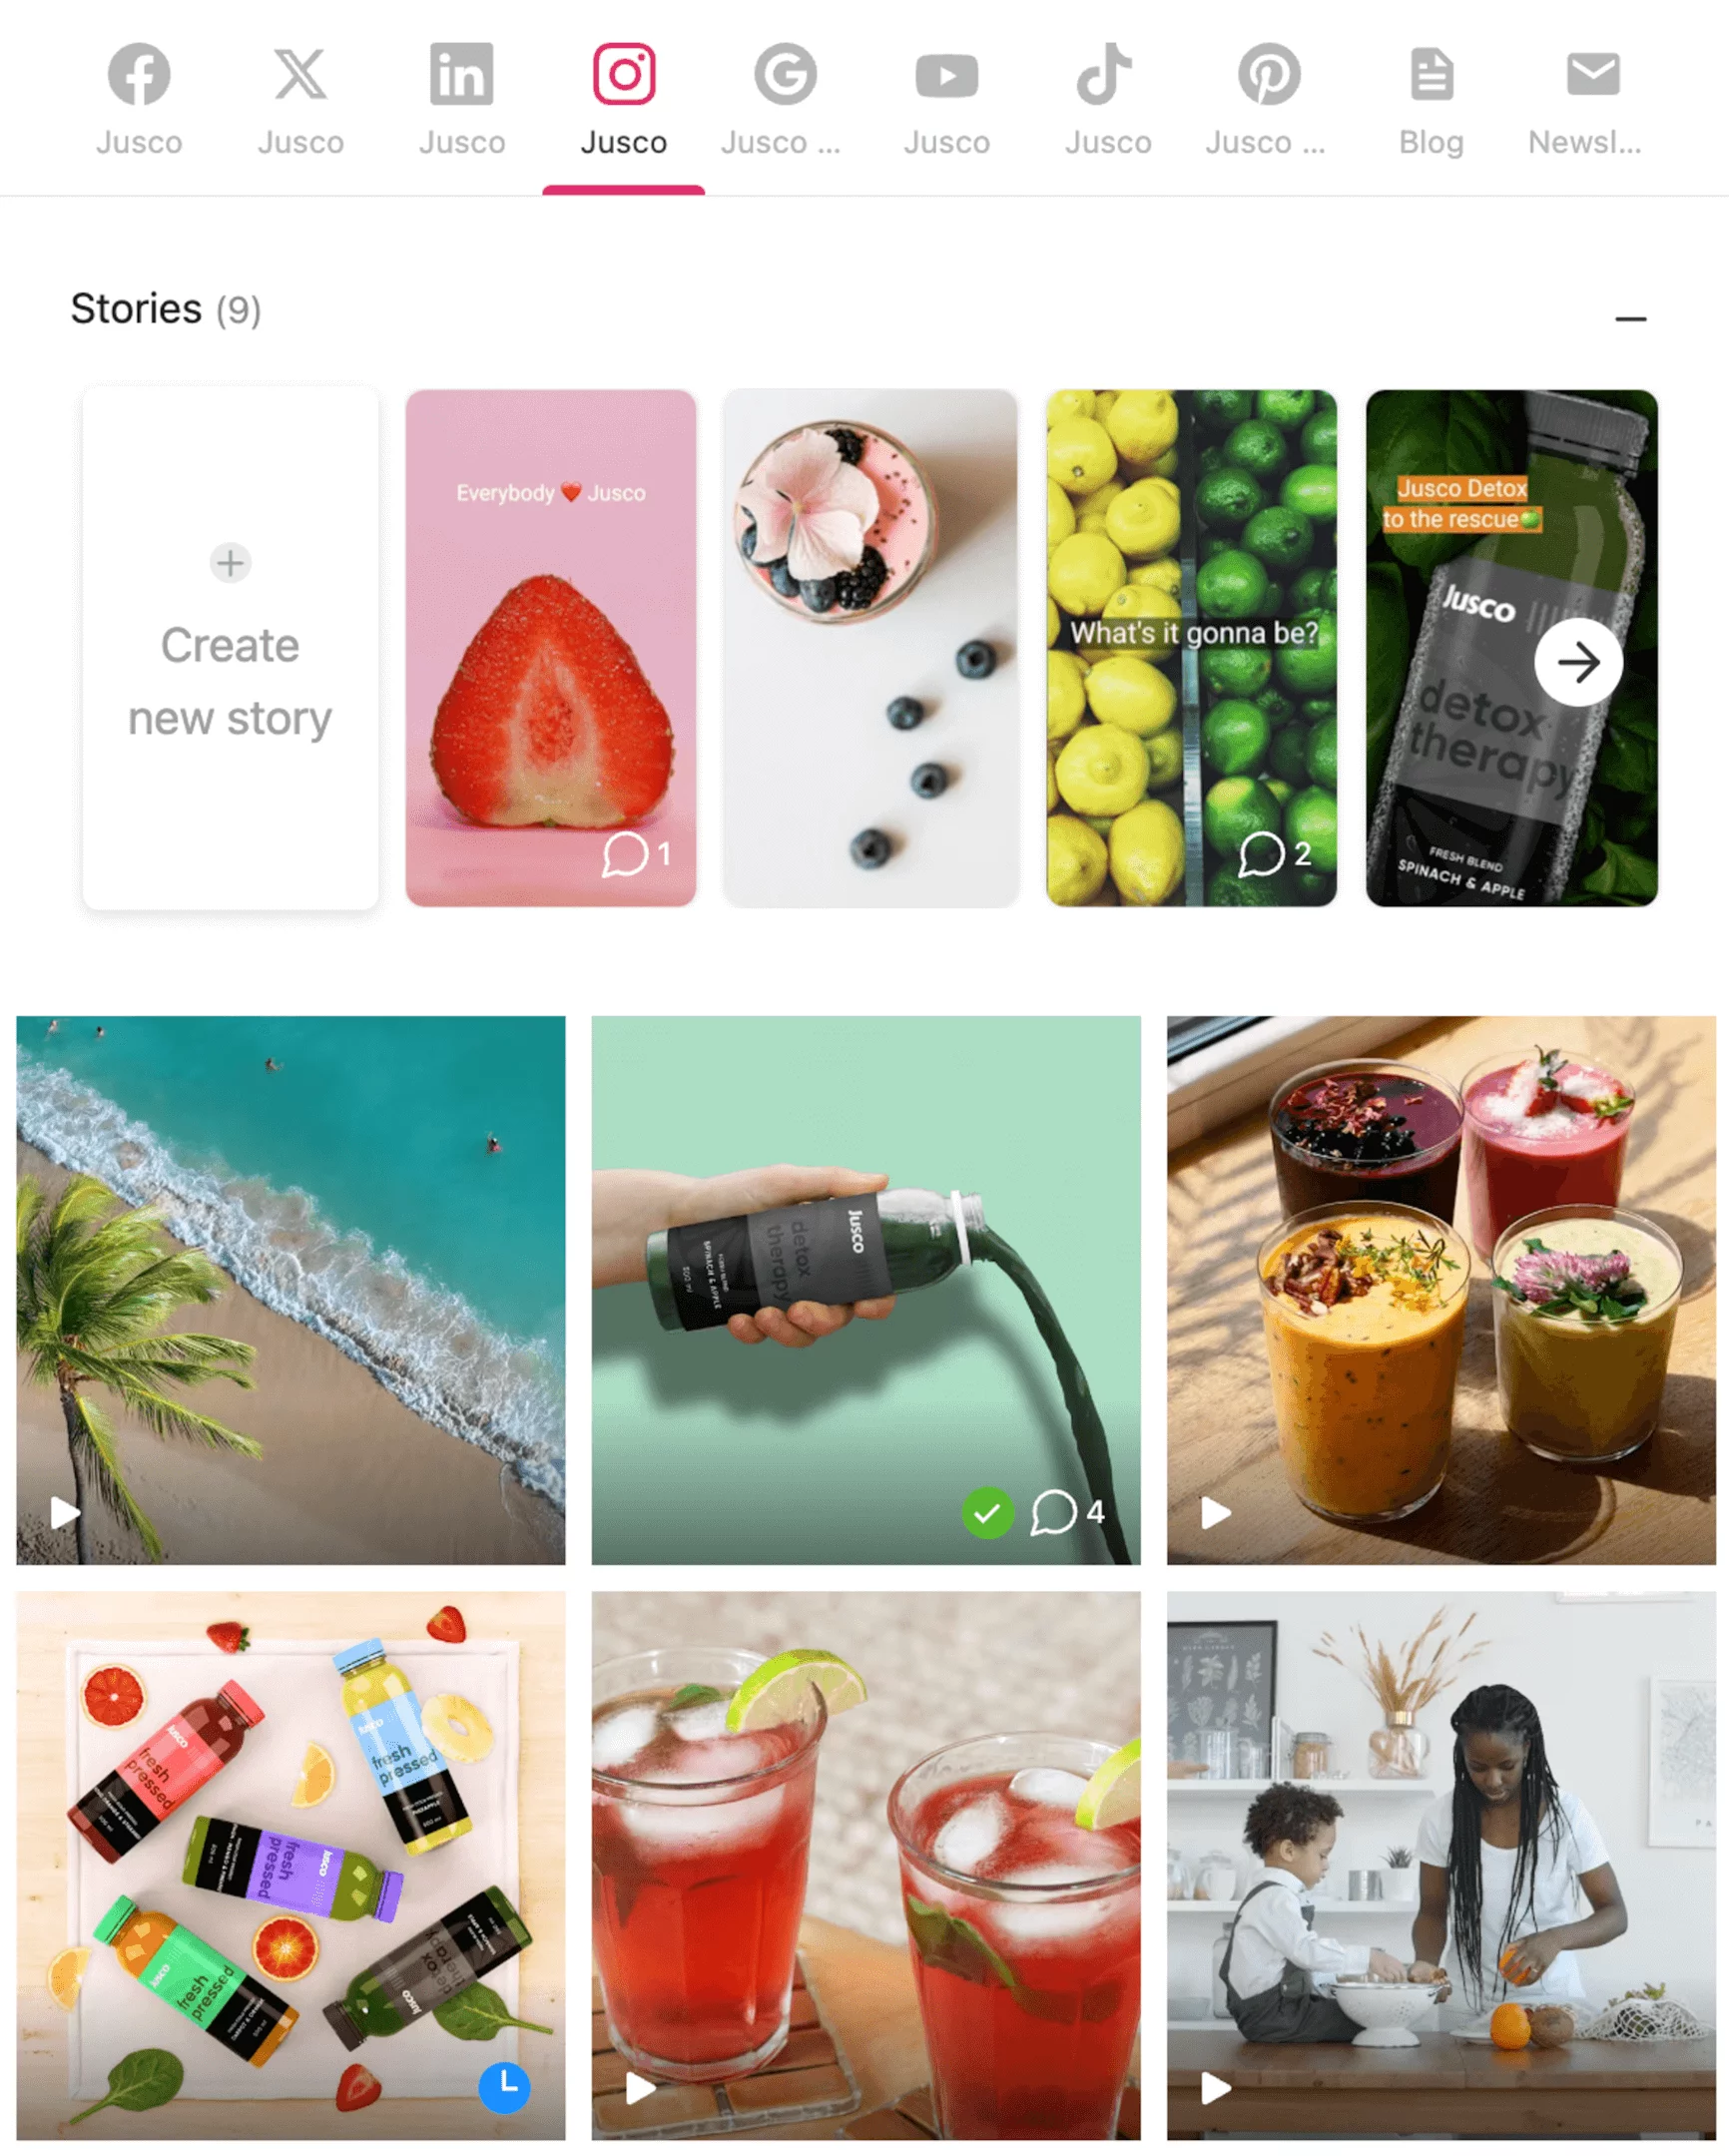 Jusco Instagram dashboard in Planable showcasing nine stories and various posts, including smoothies, detox drinks, and lifestyle images.